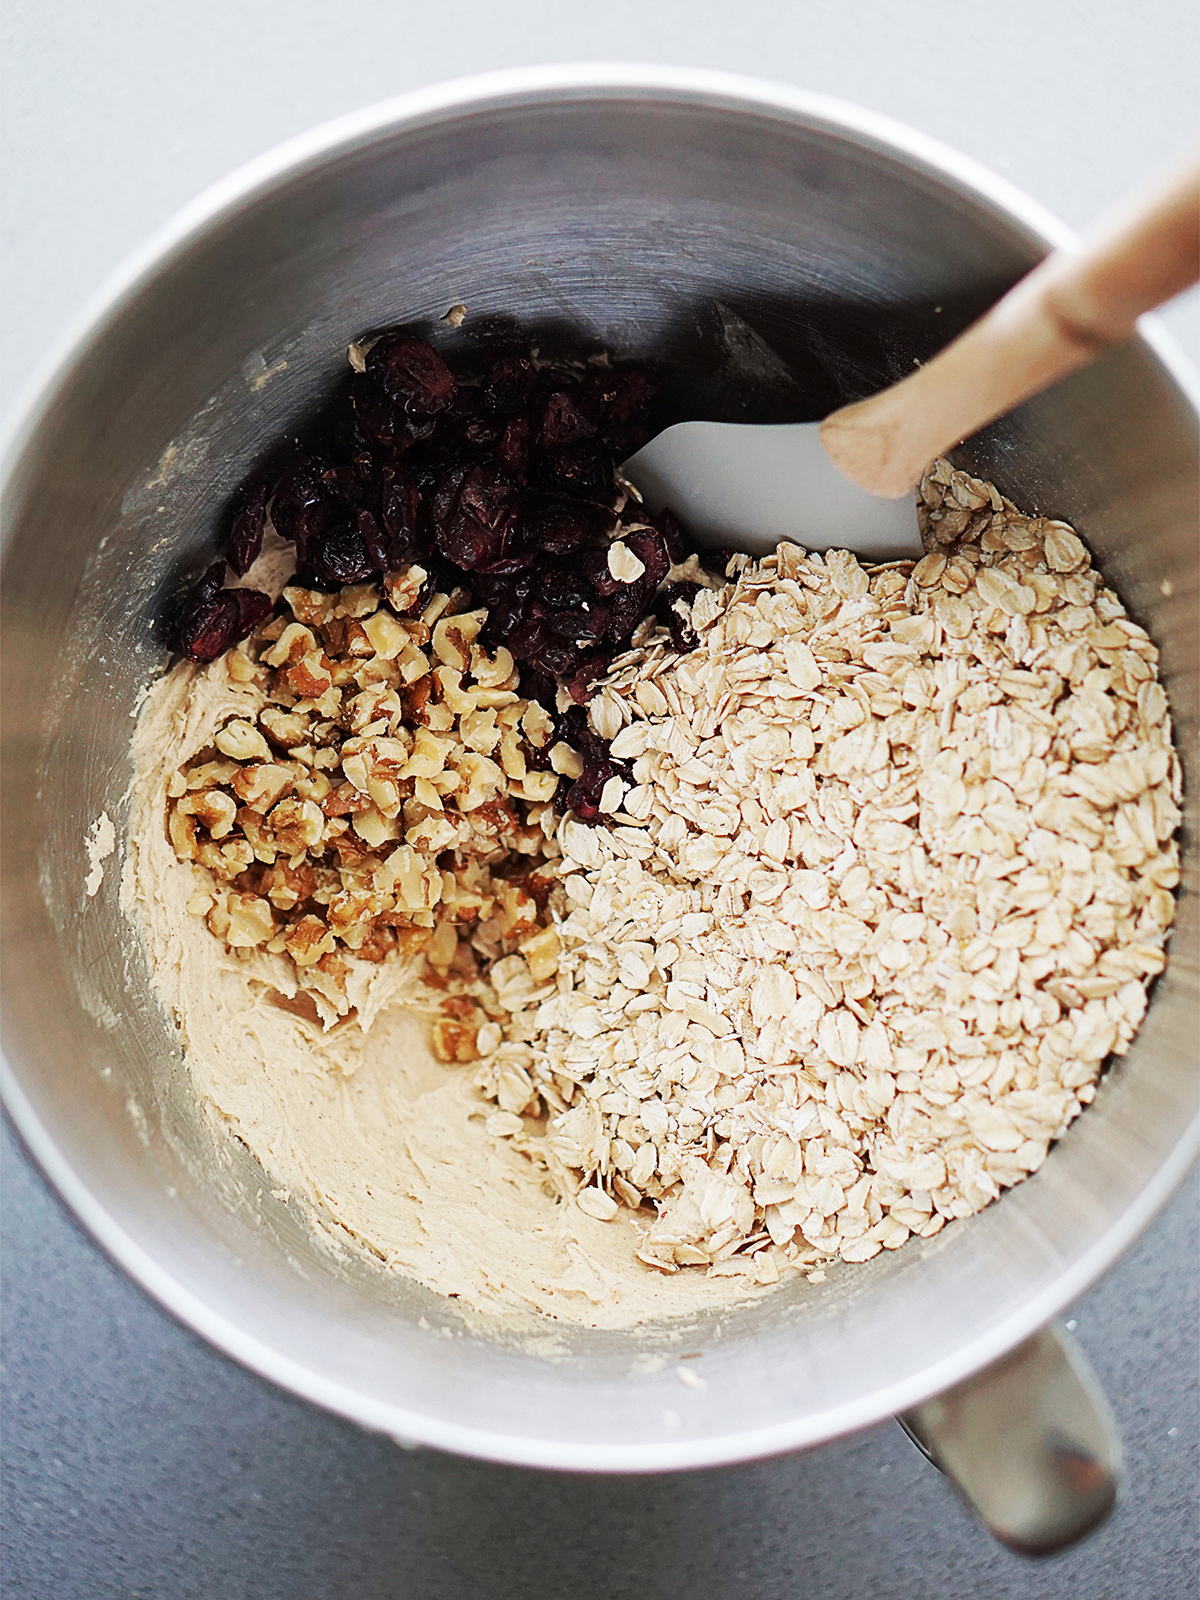 Mixing bowl with cookie dough, oatmeal flakes and chopped walnuts